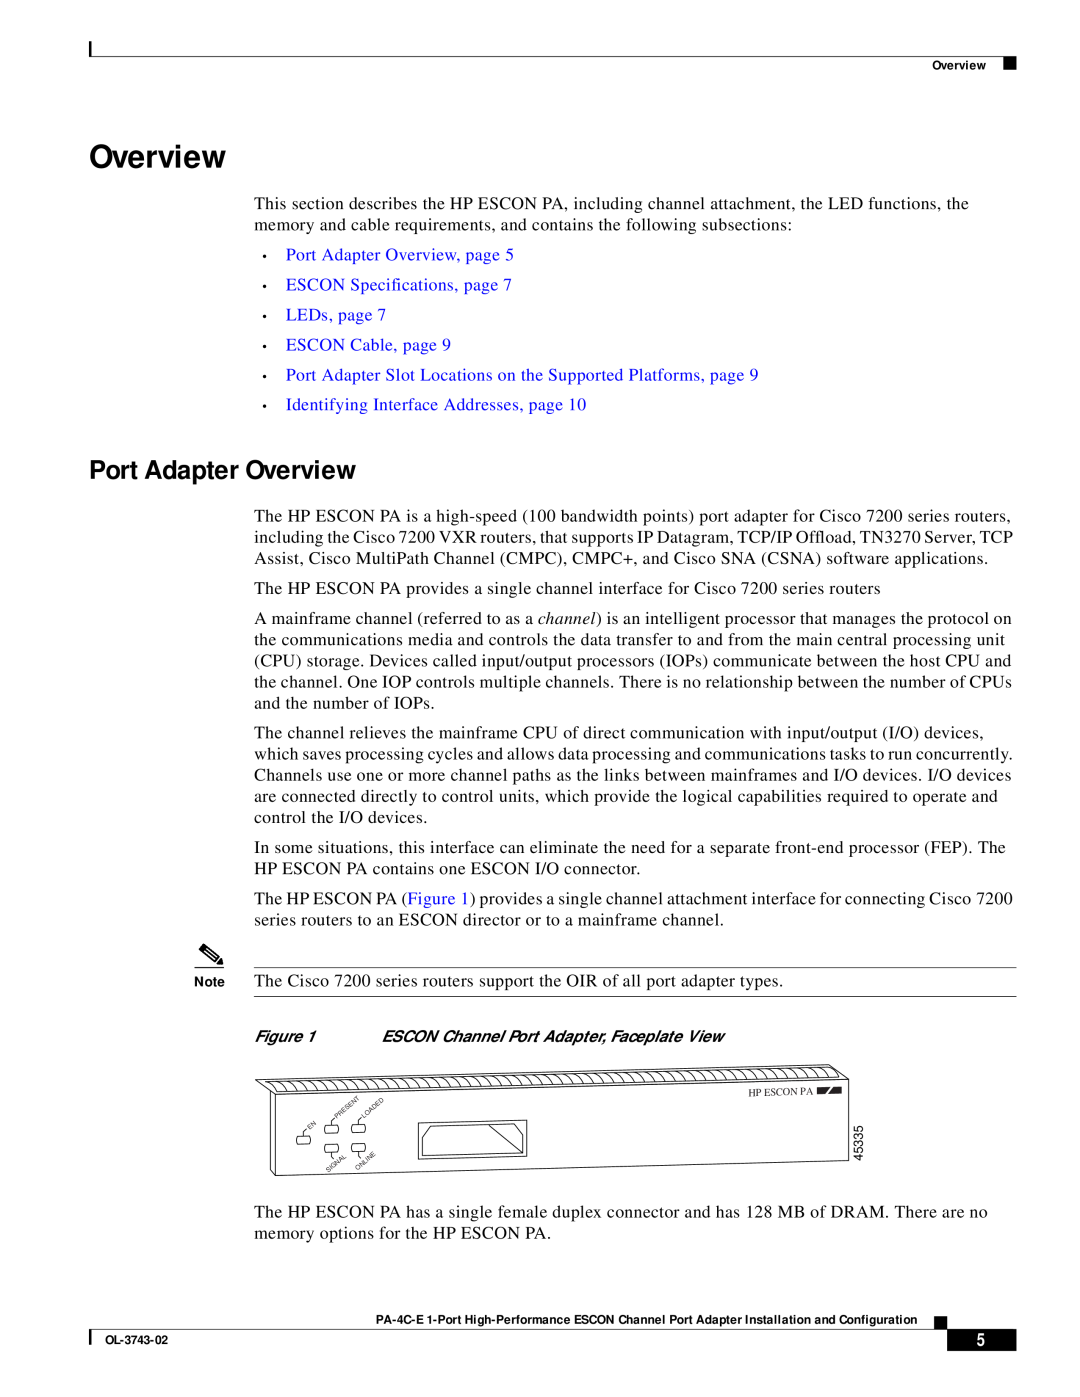 Cisco Systems PA-4C-E 1 manual Port Adapter Overview, page ESCON Specifications, page LEDs, page, ESCON Cable, page 